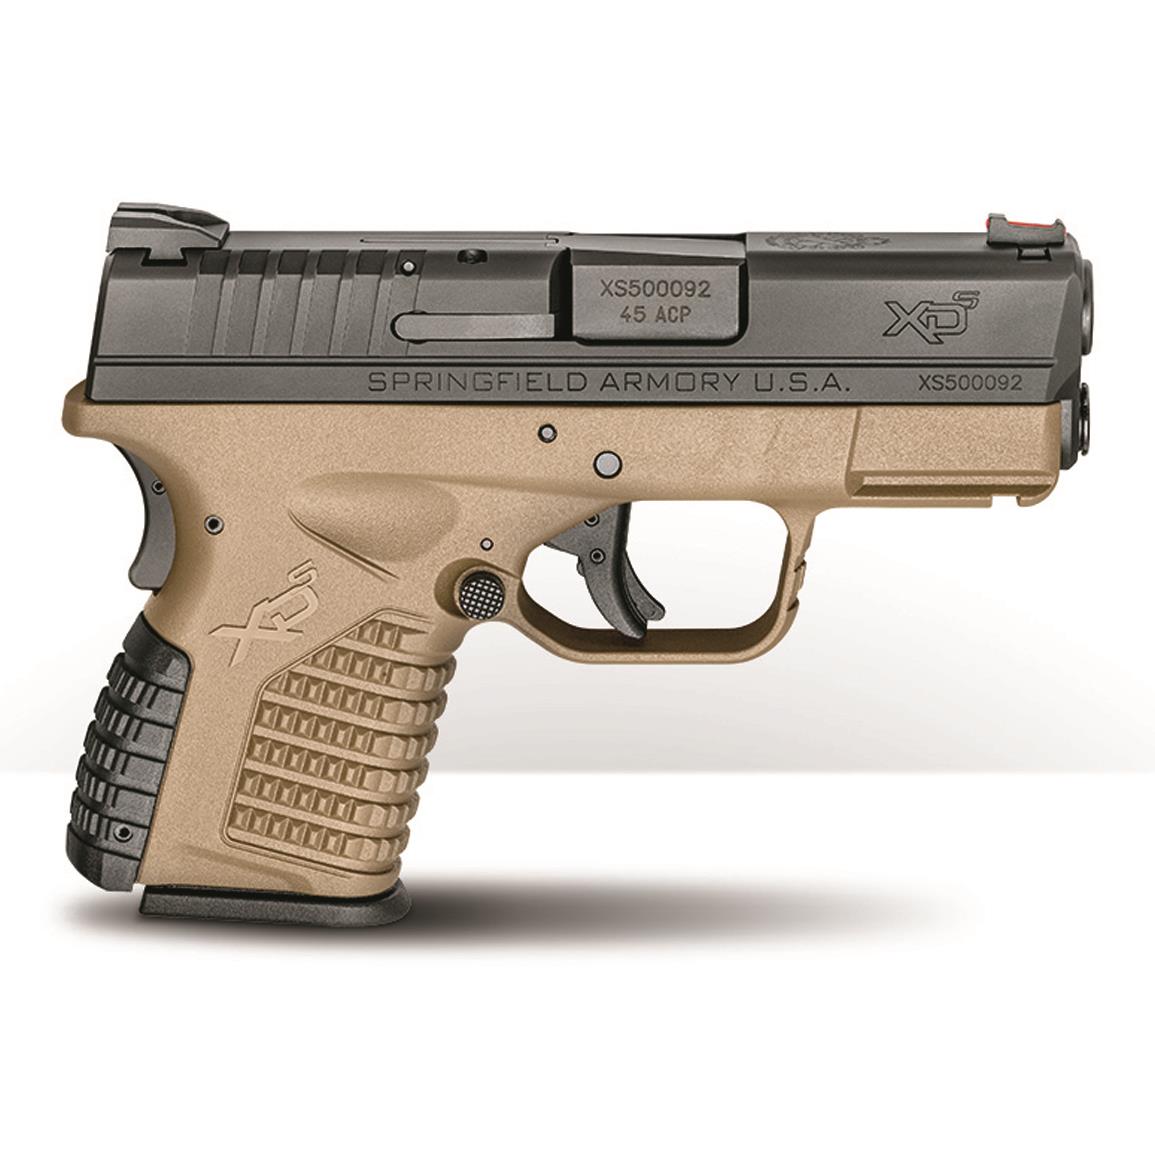 Springfield XD-S 3.3" Single Stack, Semi-Automatic, .45 ACP, 3.3" Barrel, FDE Frame, 5+1 Rounds